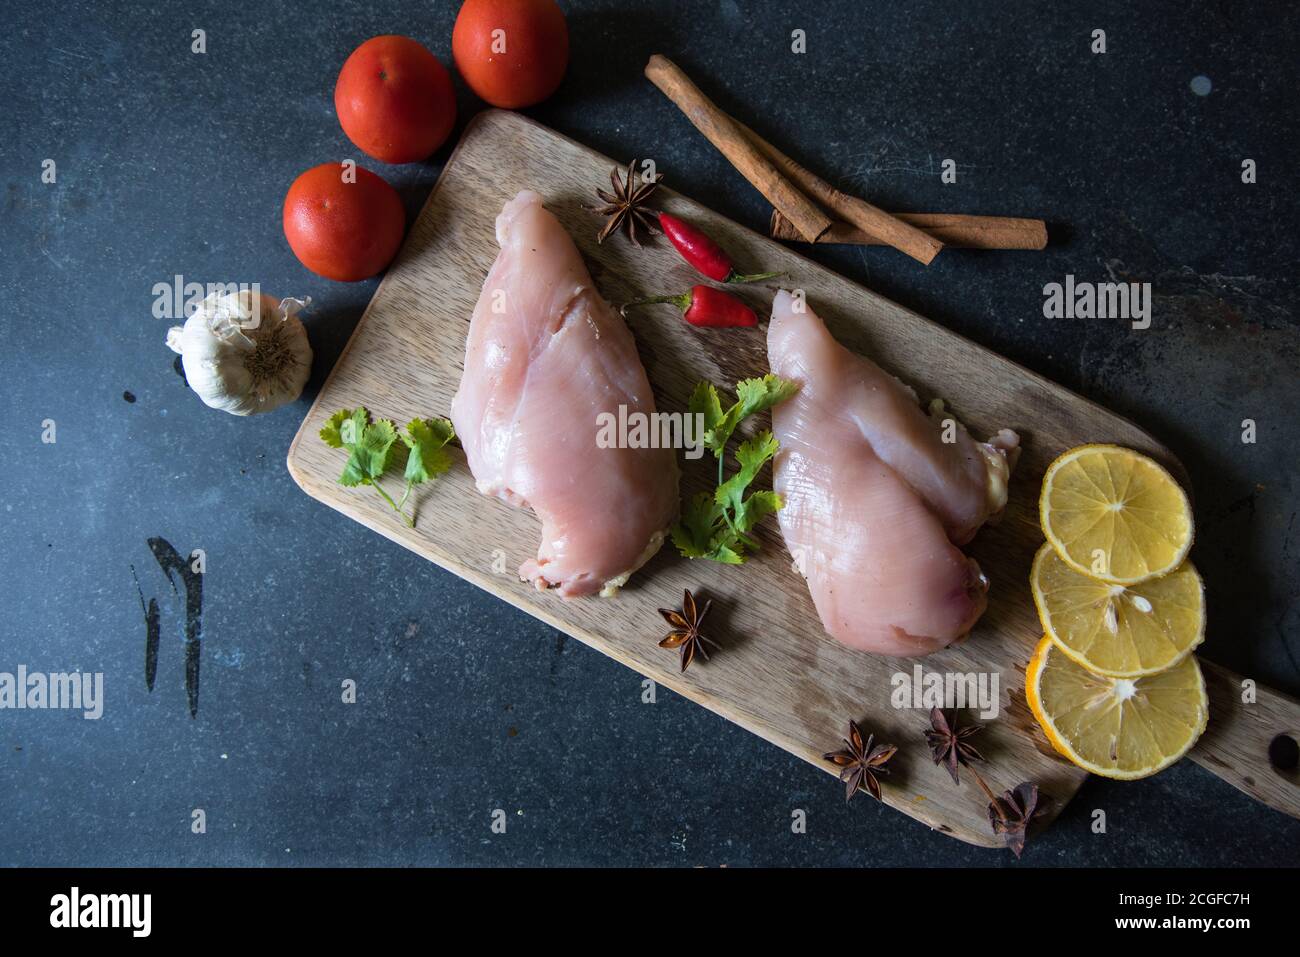 Raw chicken fillets on a wooden cutting board with ingredients for cooking on a black background Stock Photo